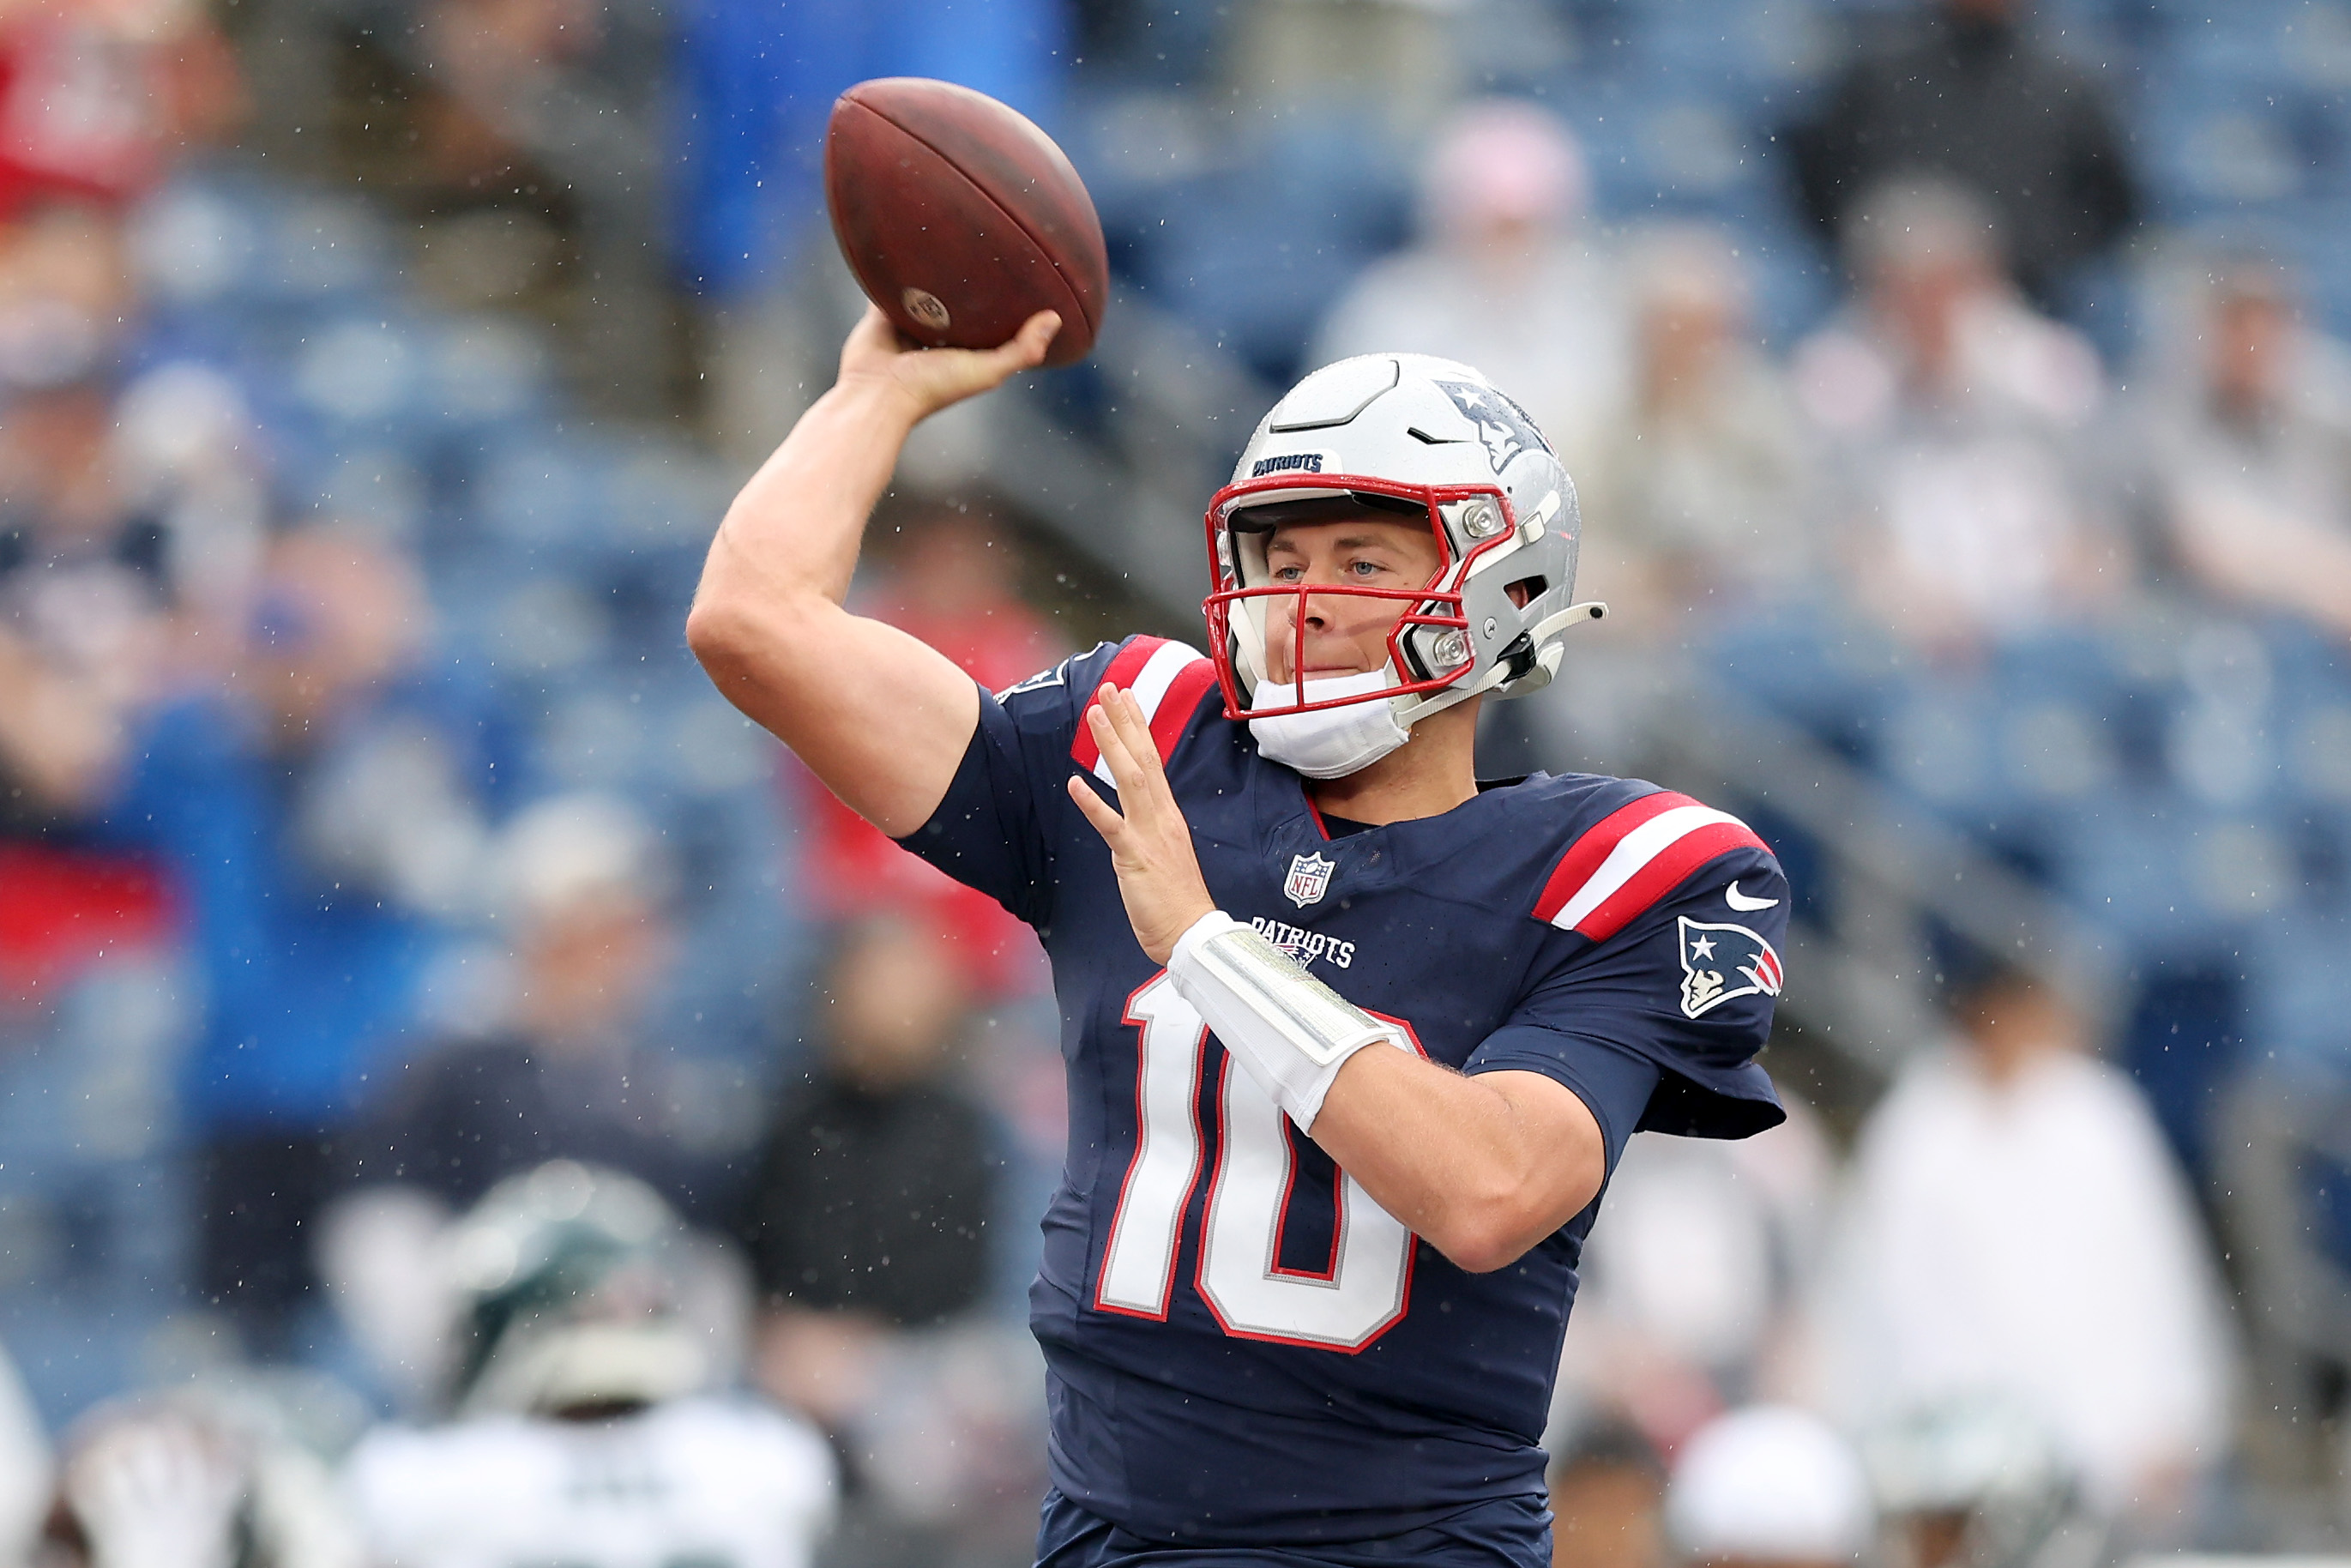 Patriots' red throwback jerseys will make a comeback in 2022 - Pats Pulpit